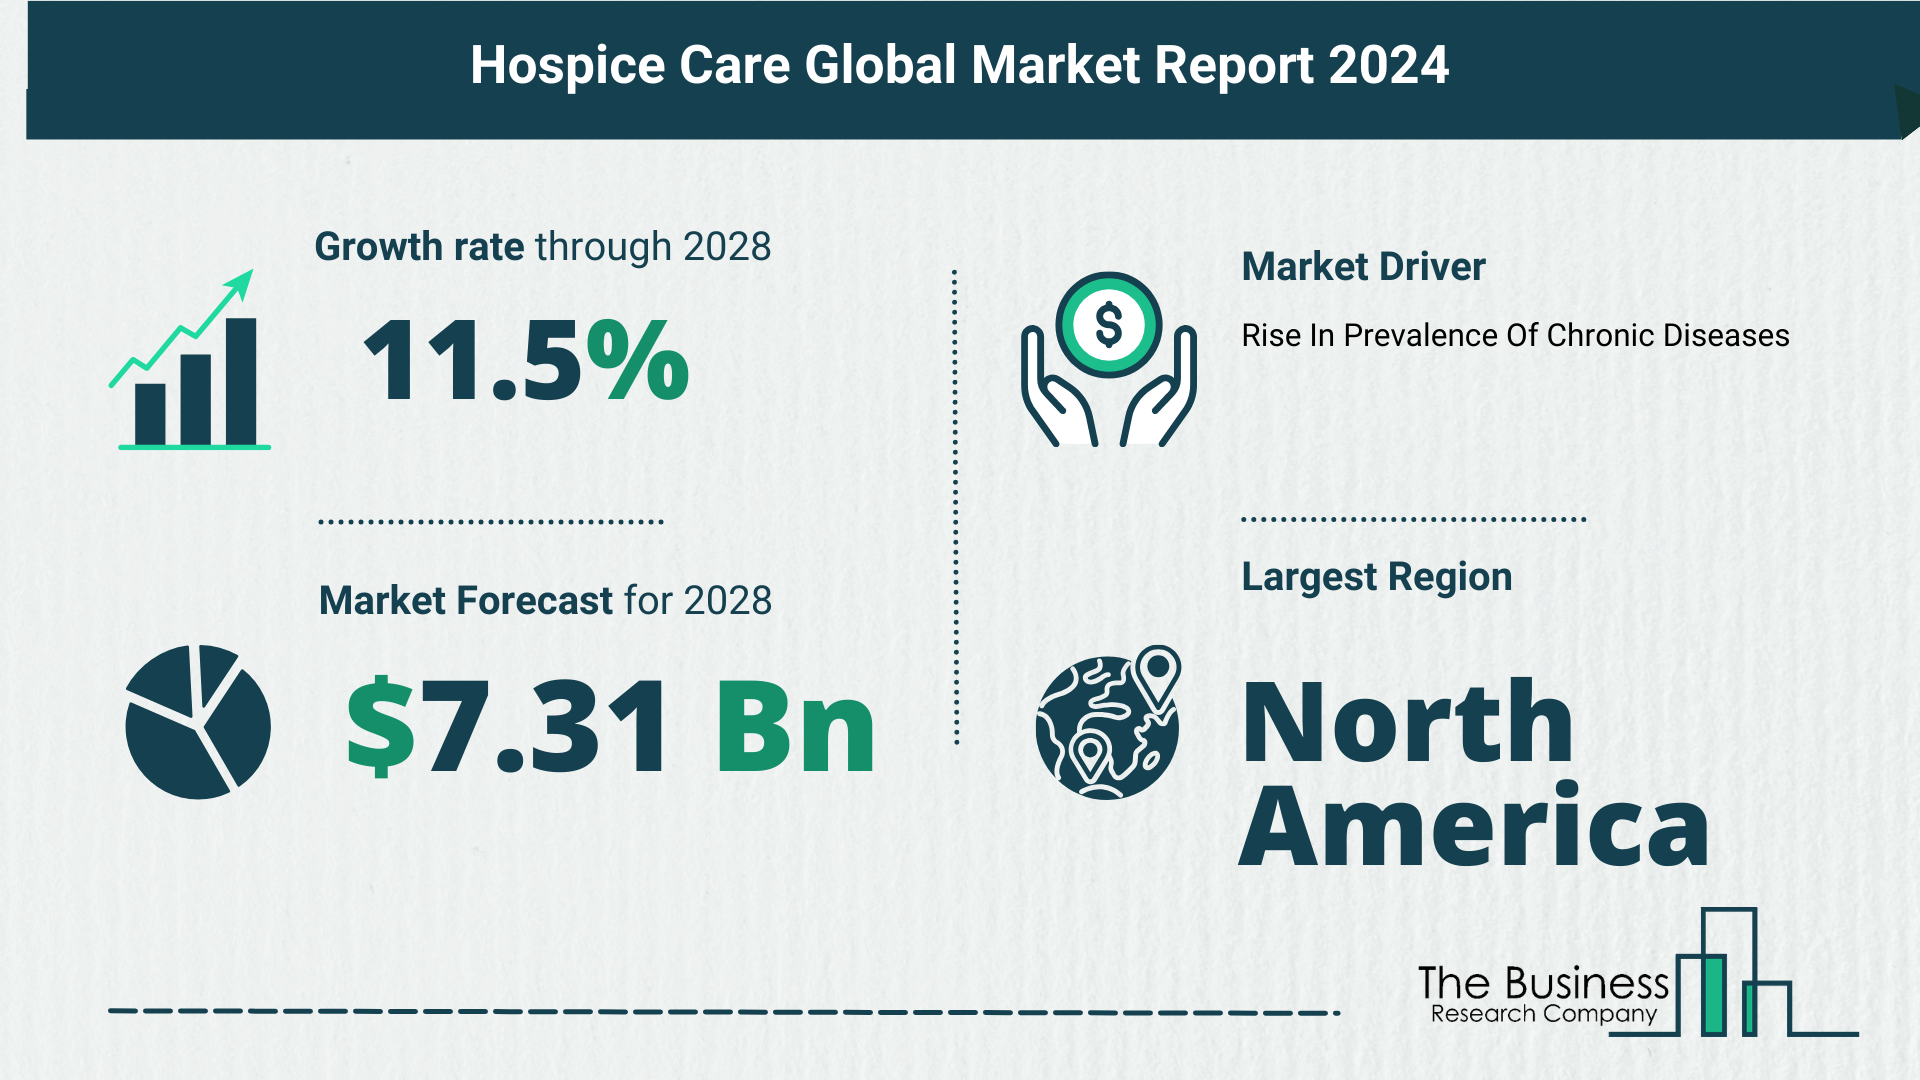 What Is The Forecast Growth Rate For The Hospice Care Market?